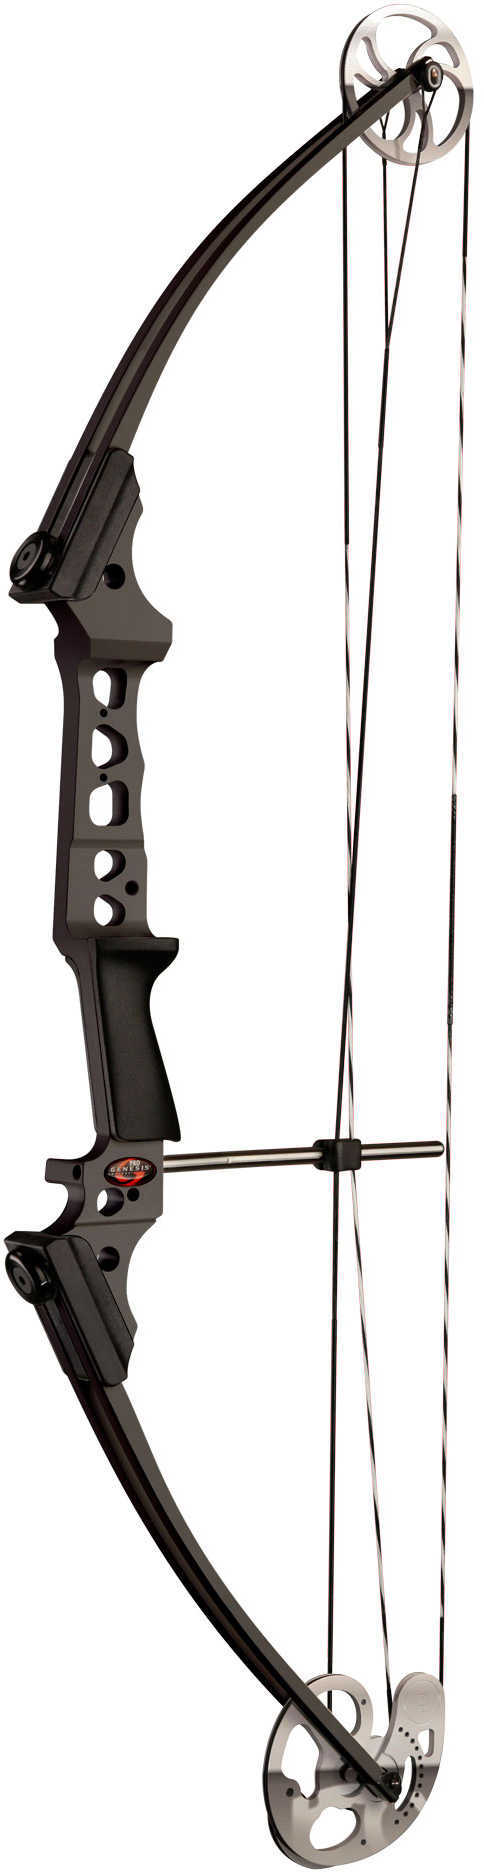 Genesis Pro Bow Right Handed Black Only 10492A